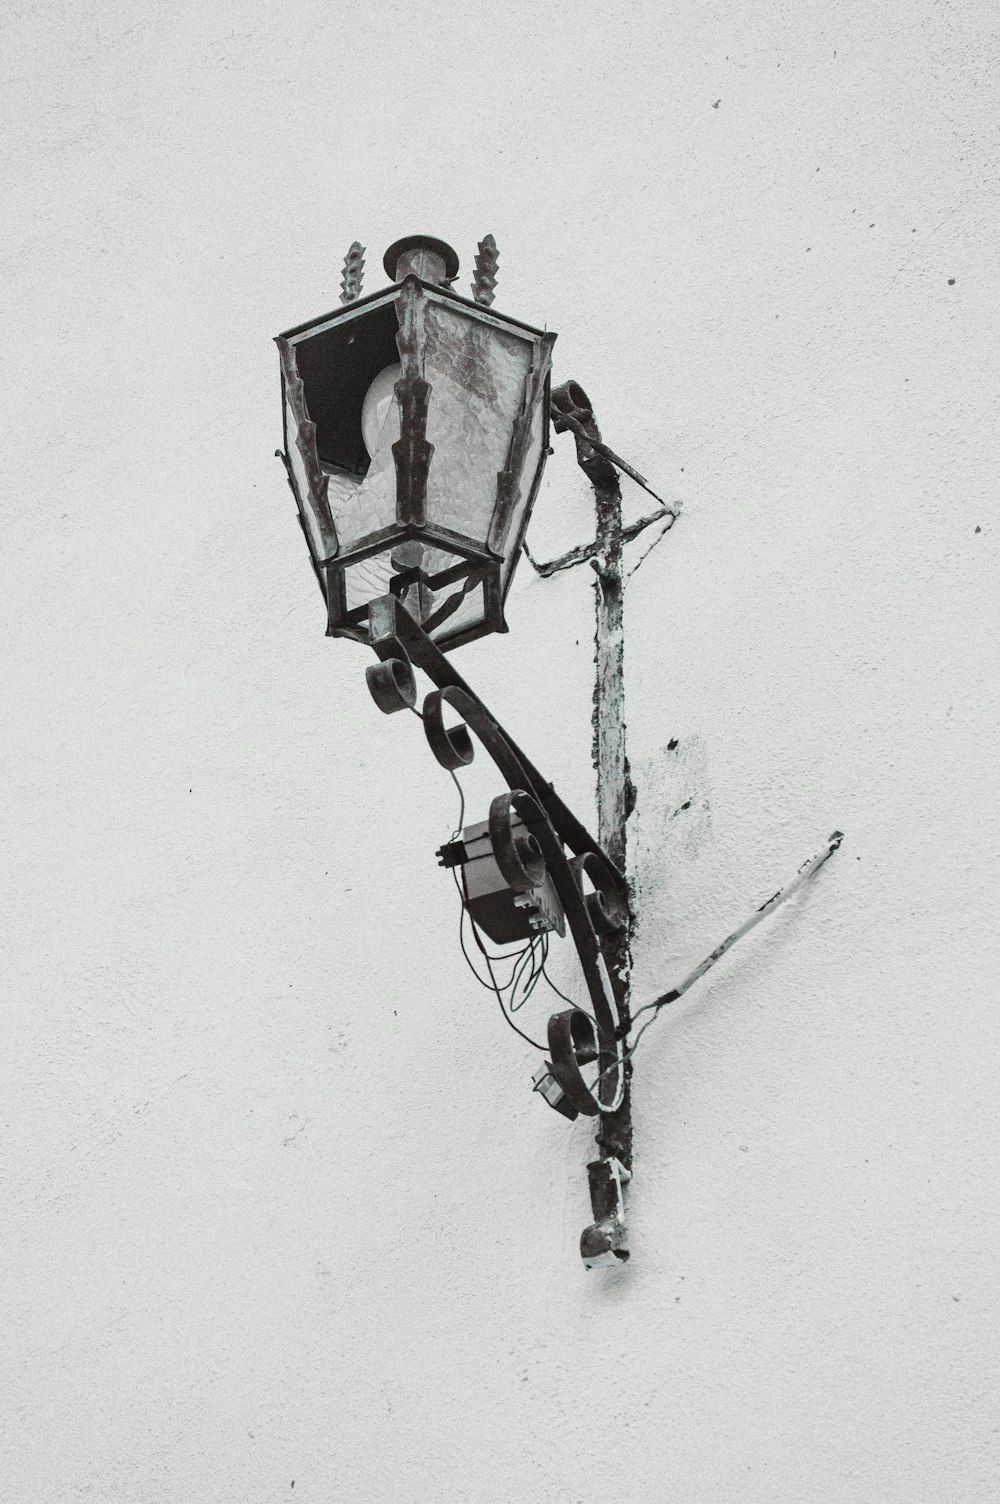 a street light on a pole in the snow